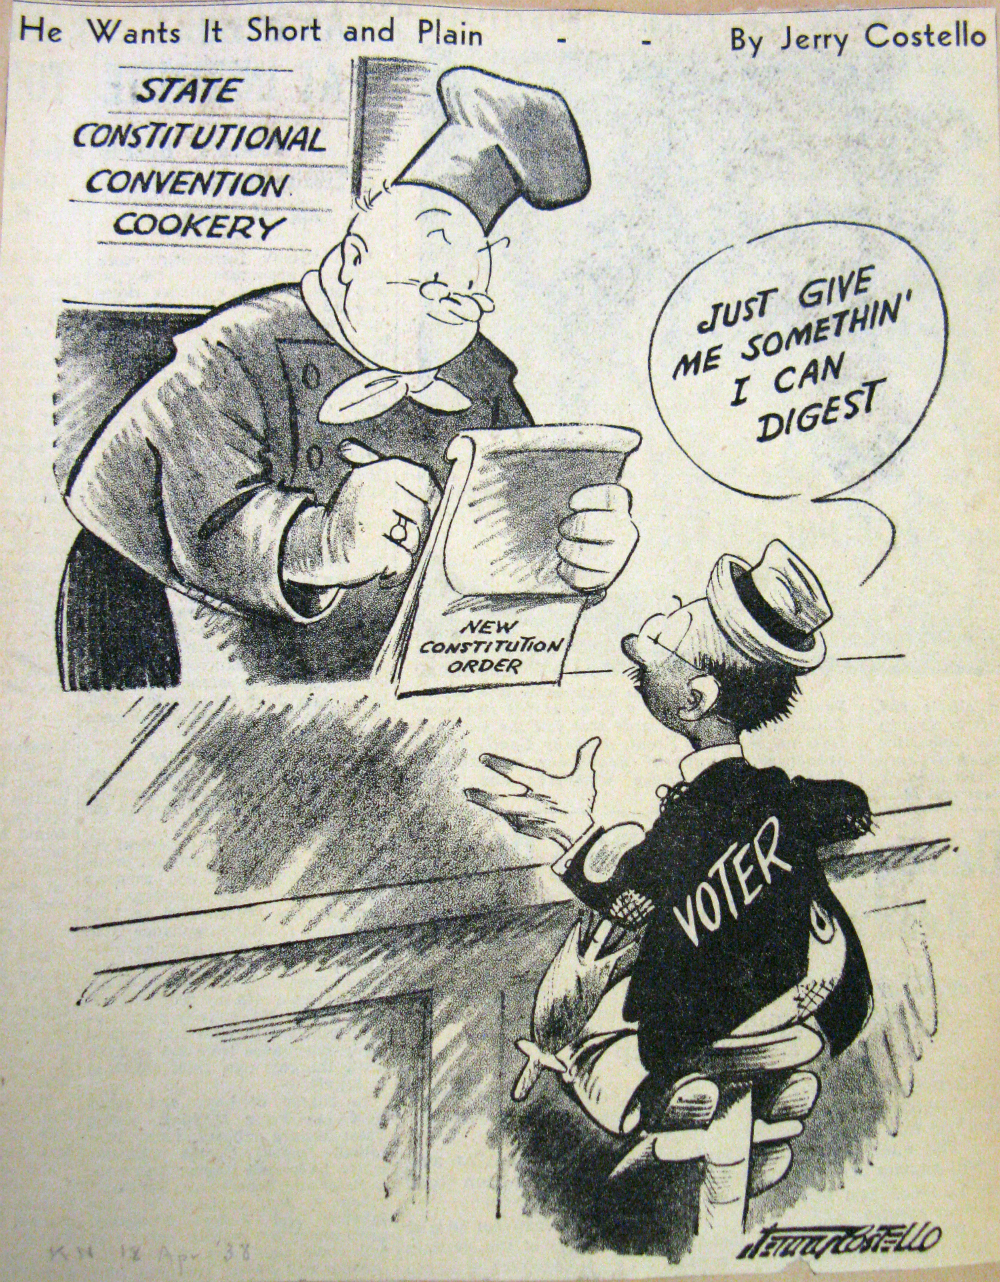 "He Wants It Short and Simple" cartoon by Jerry Costello. Archives: LOO96-78 Newspaper clippings file 1938